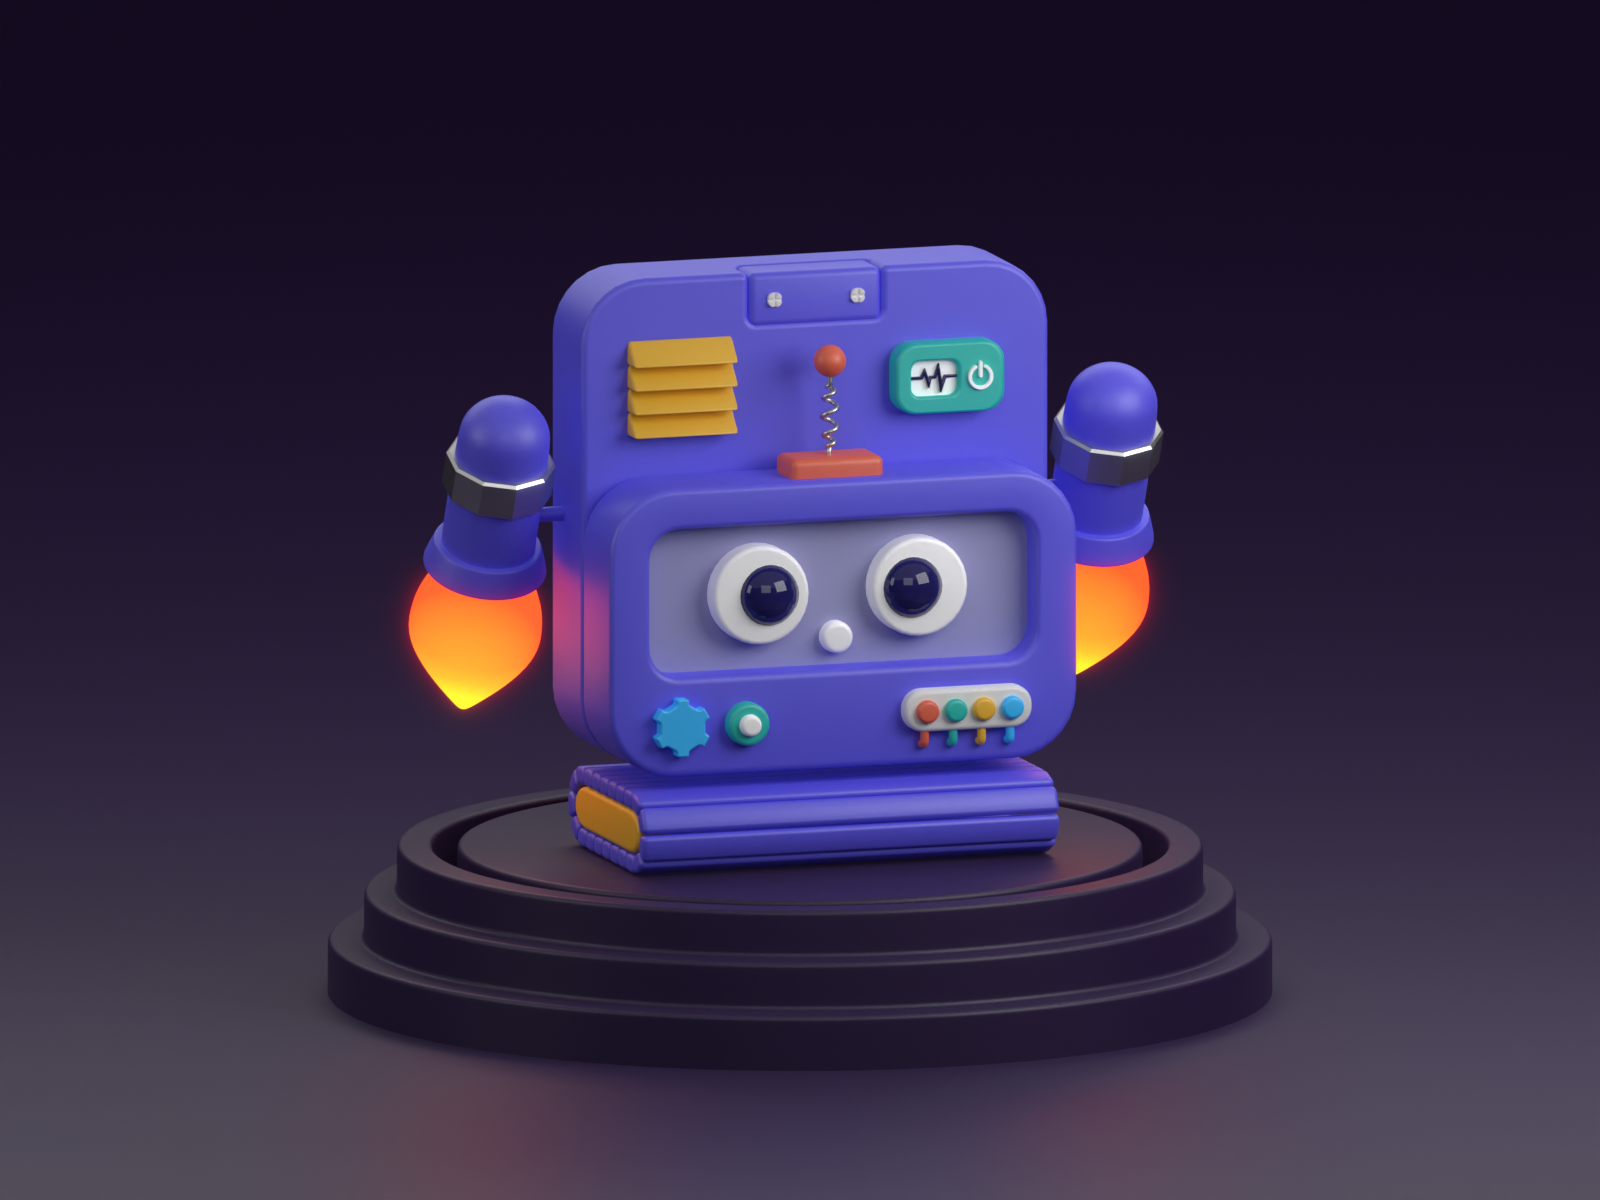 Toy Robot 3d 3dart 3ddesign b3d baby blender blue character cute cycles eyes icon illustration plastic purple rail render robot tank toy